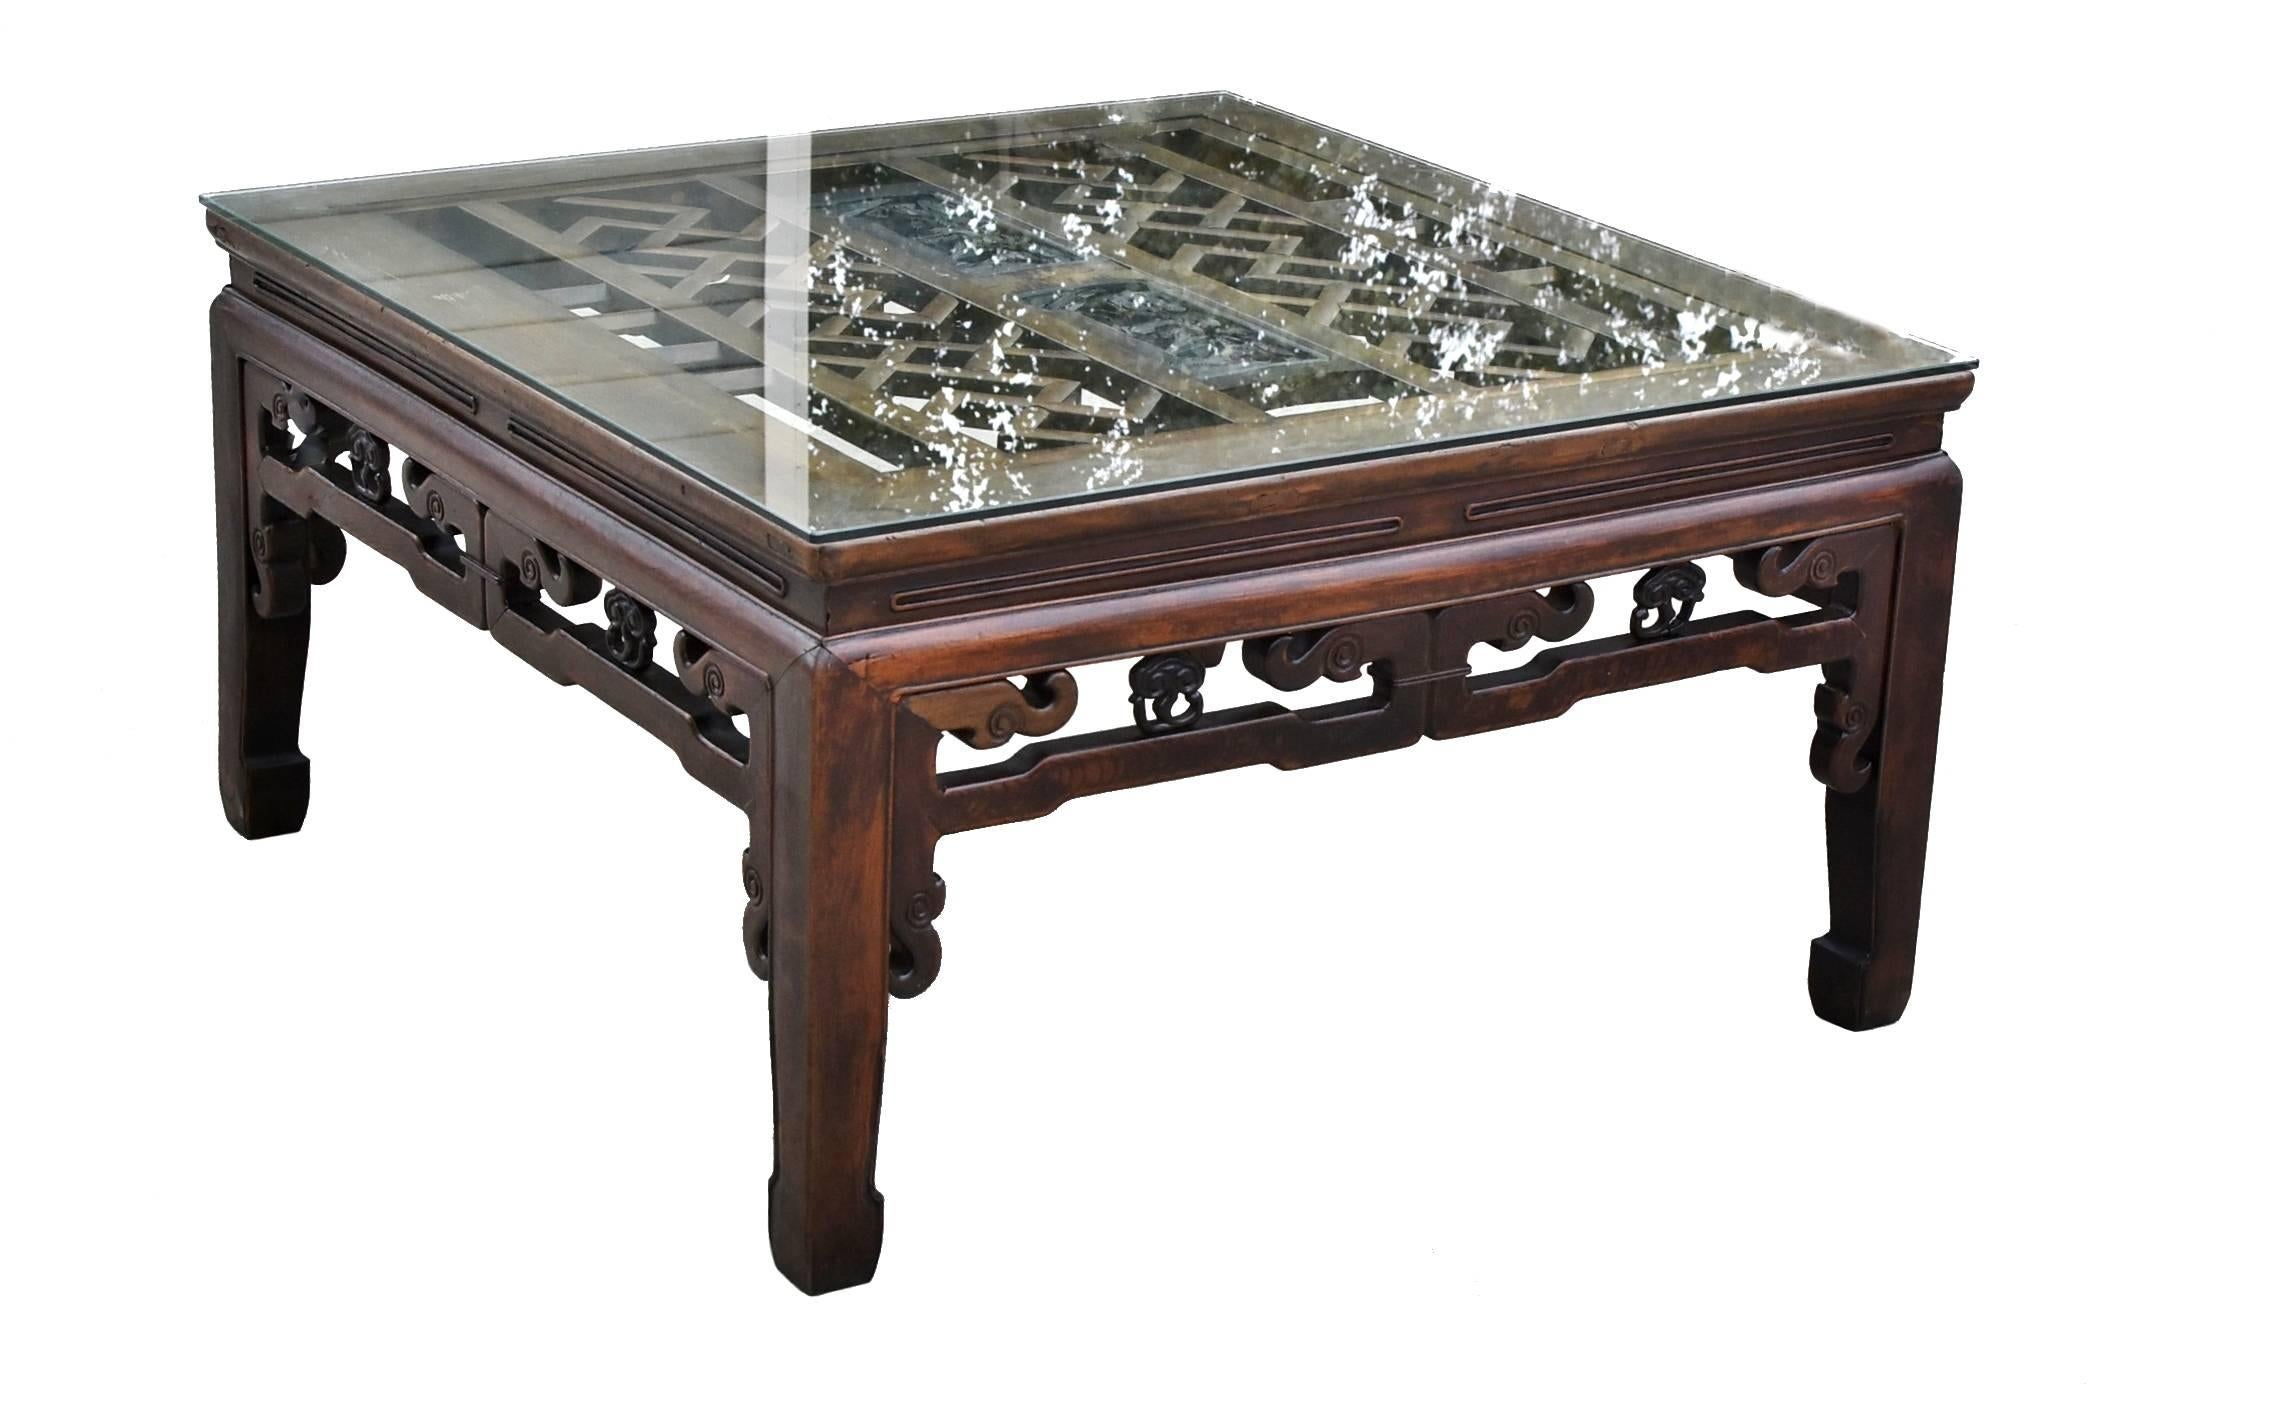 A beautiful square coffee table that is inset with a large antique carved screen. The table is typical of Southern Chinese style with scroll works and Lin Zhi, a herb medicine that symbolizes good health and long life. The screen depicts pine trees